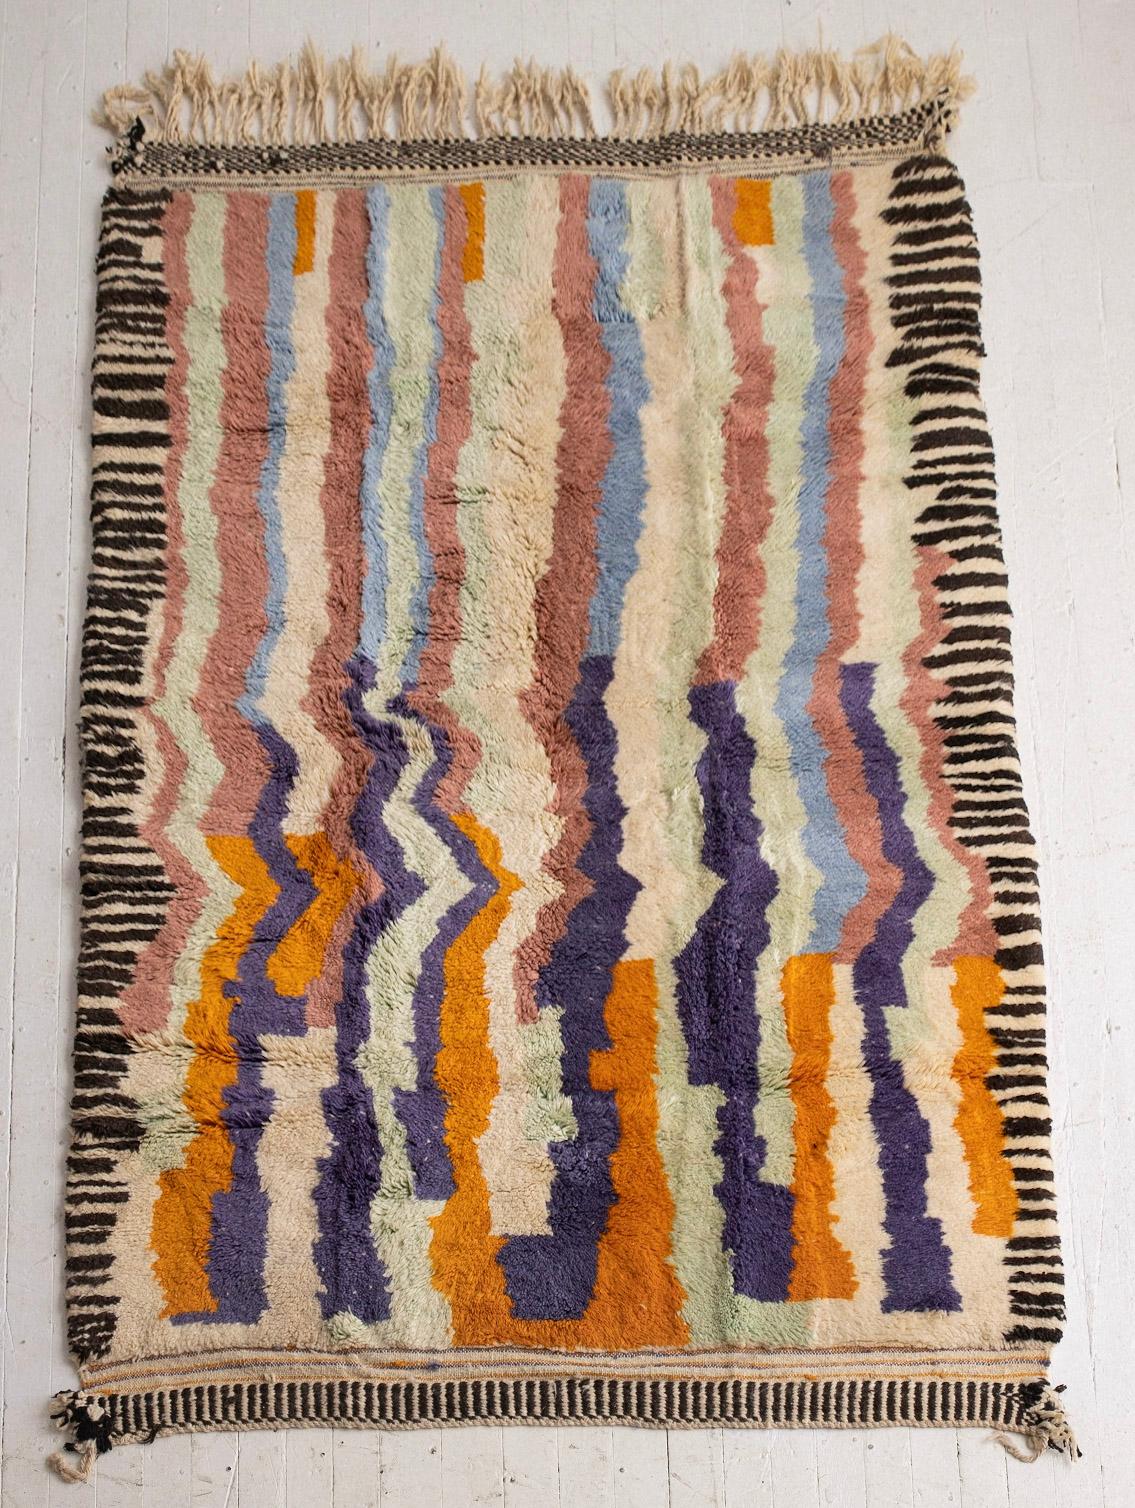 Hand knotted Moroccan wool rug. High pile shag. Memphis Milano inspired graphic pattern in a warm pastel color pallet.